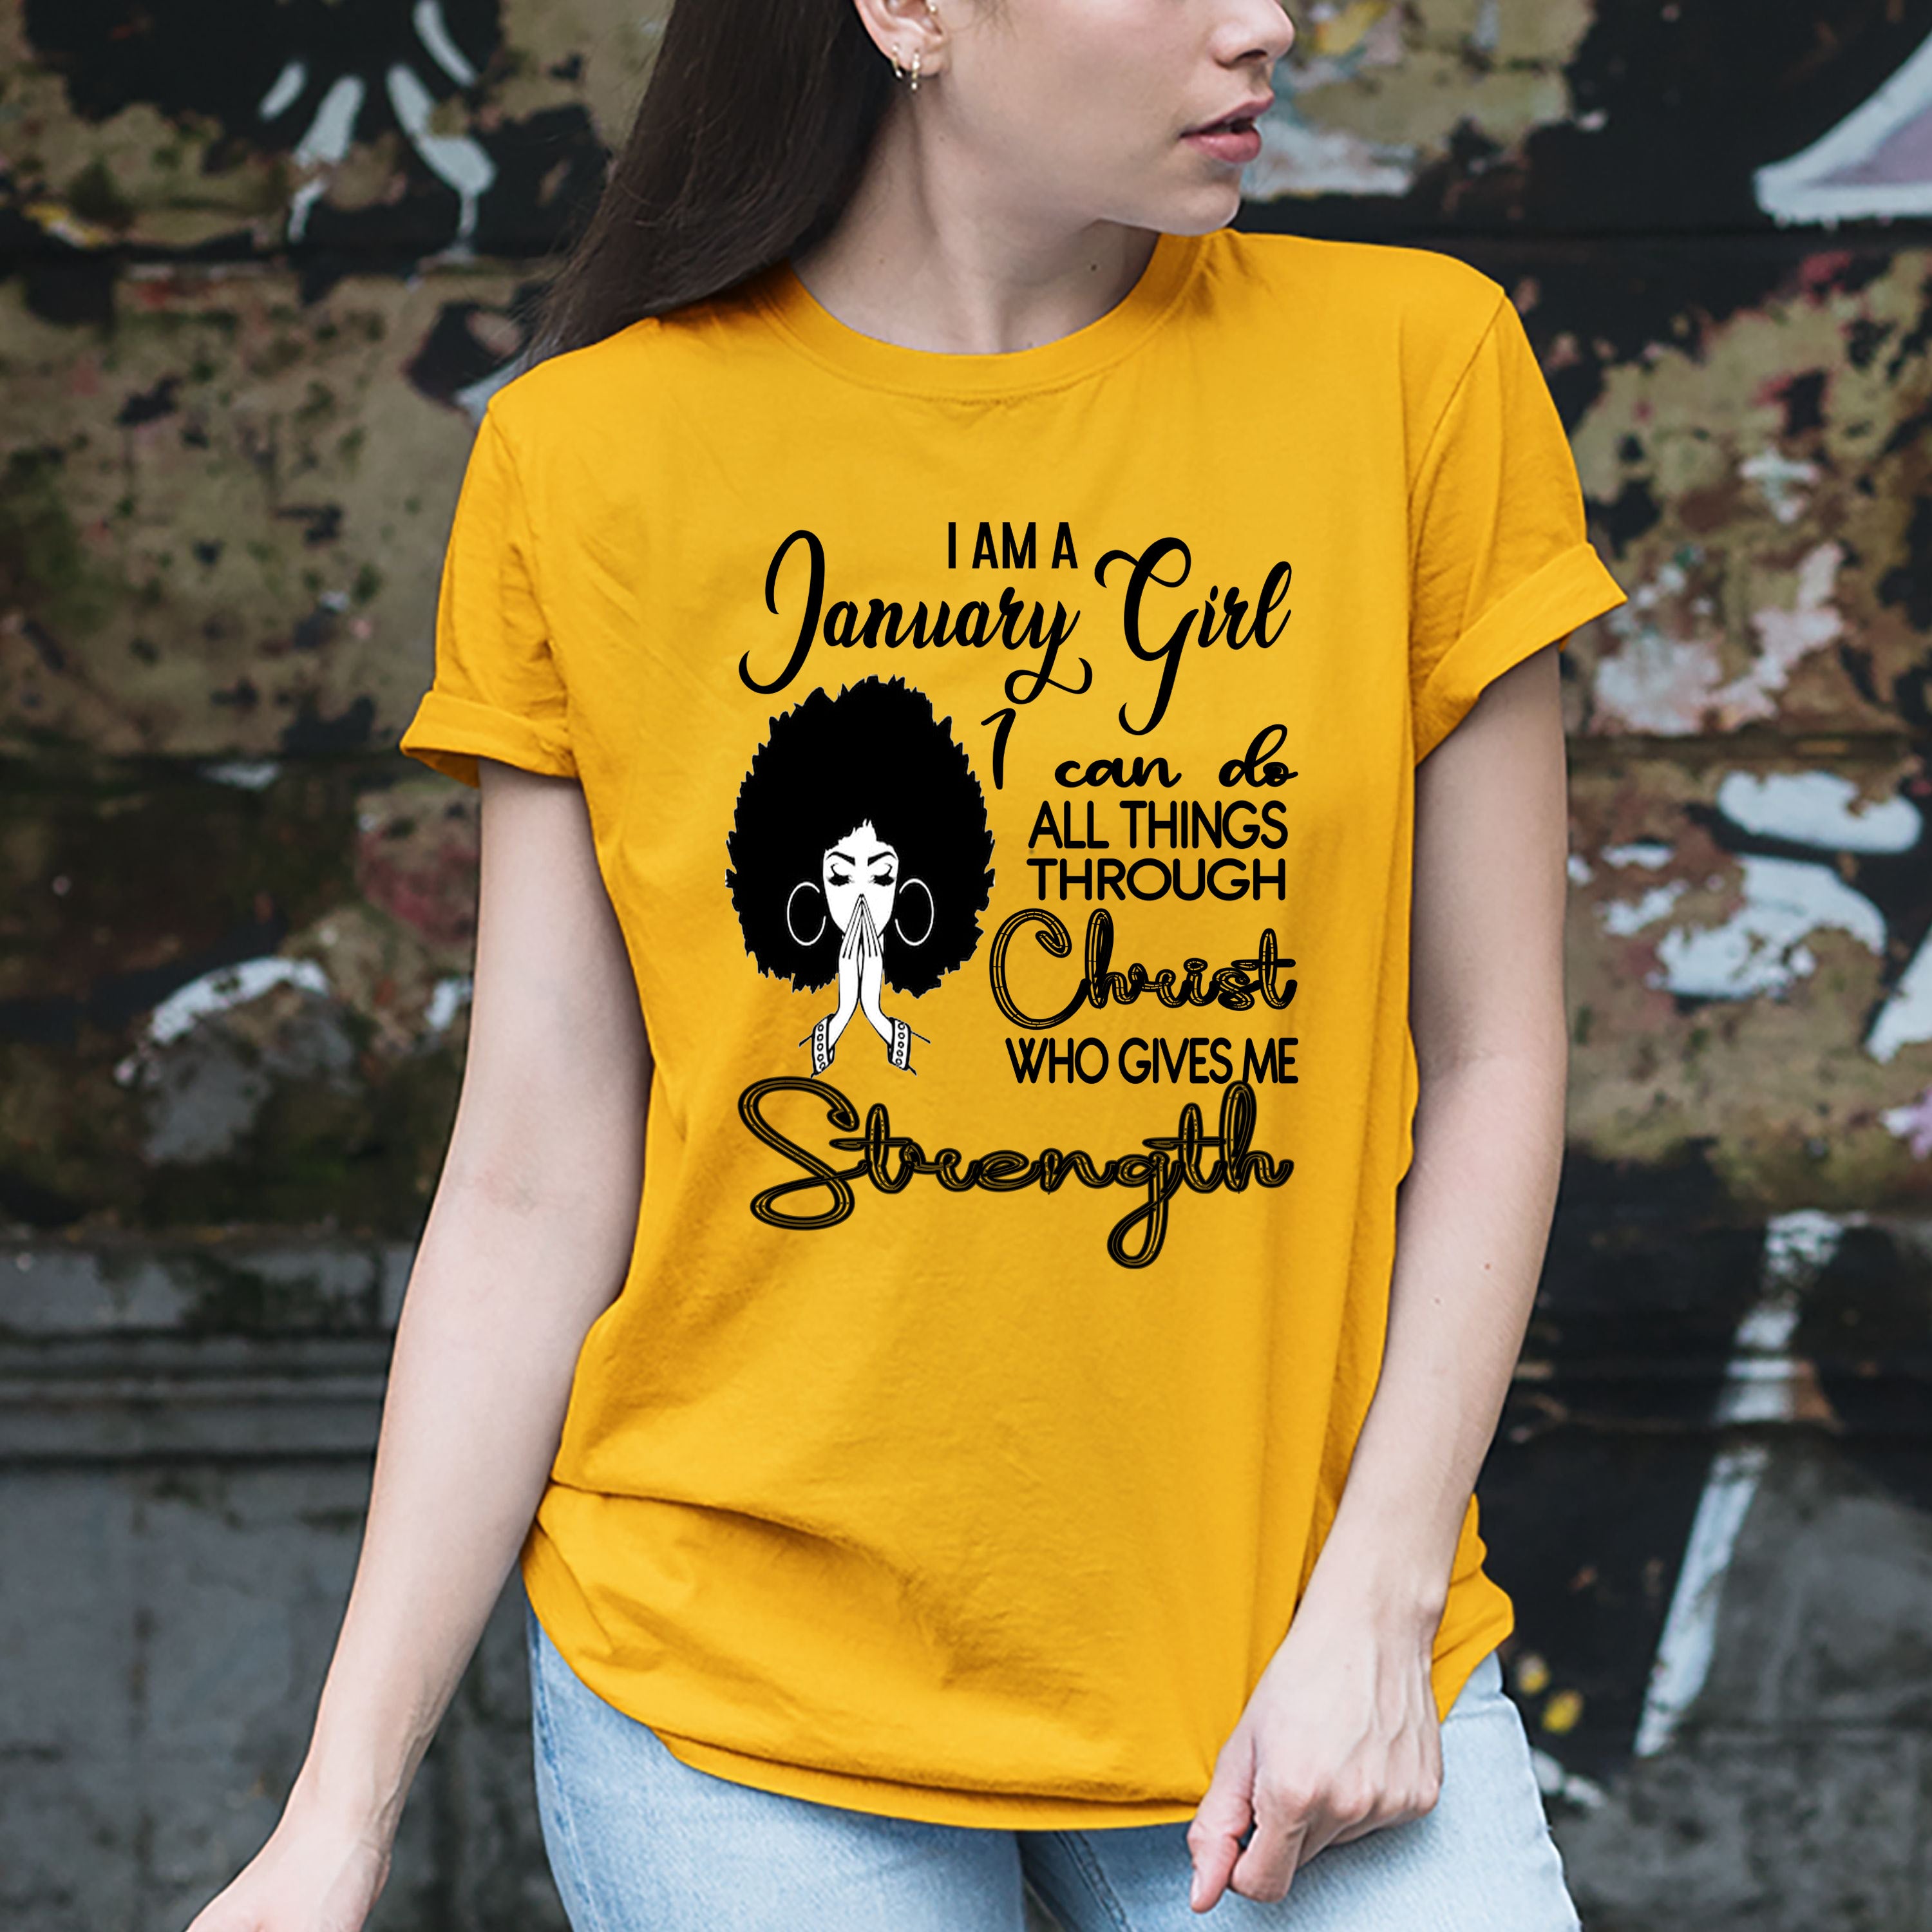 "JANUARY GIRL Can Do All Things Through Christ Who Gives Me Strength",T-Shirt.